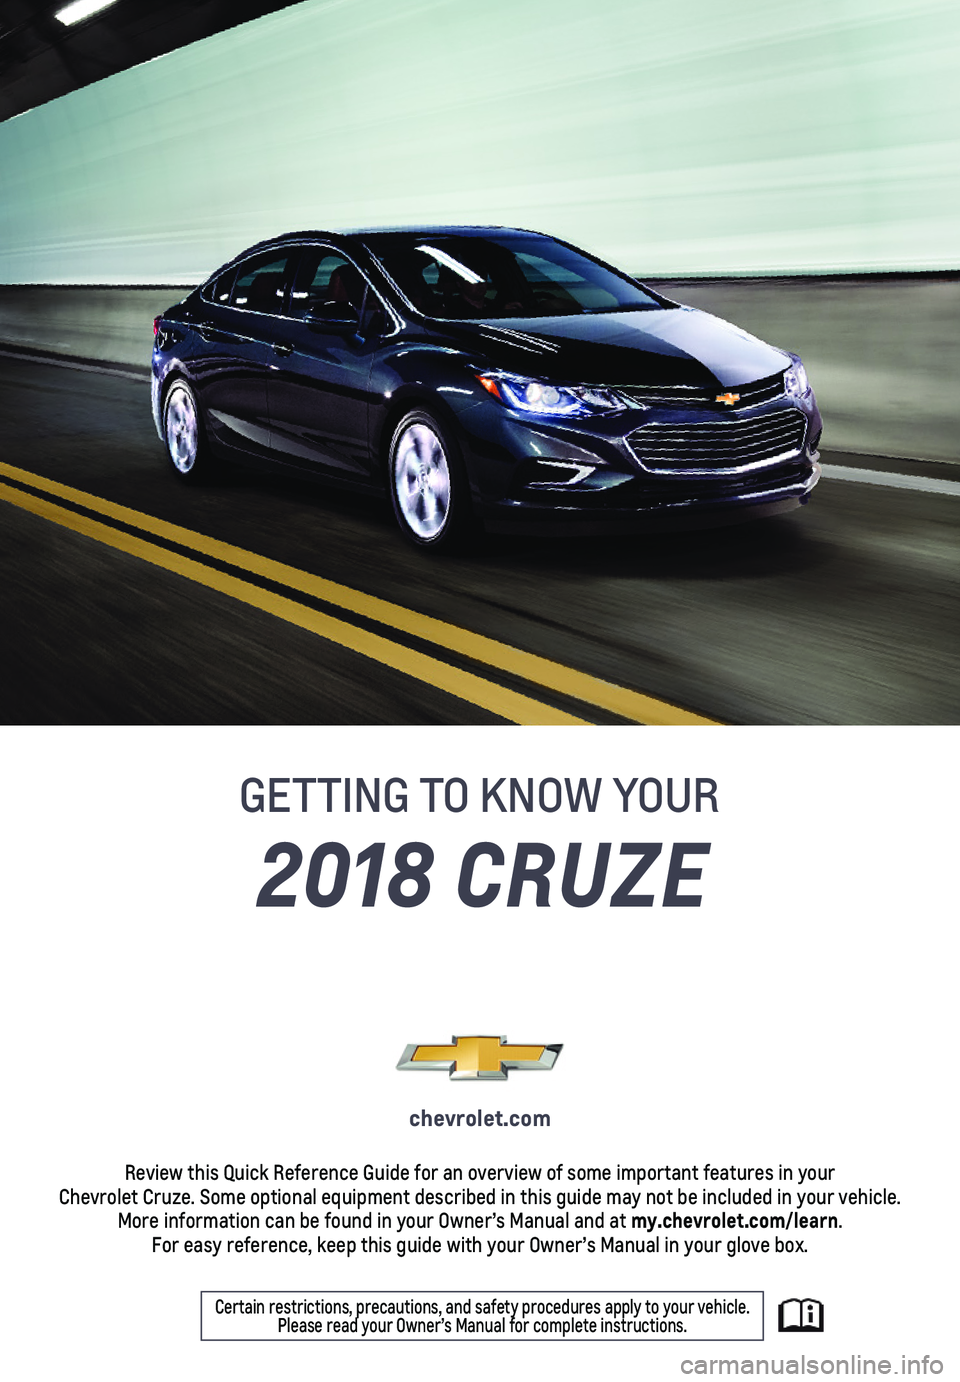 CHEVROLET CRUZE 2018  Get To Know Guide 2018 CRUZE
GETTING TO KNOW YOUR
chevrolet.com
Review this Quick Reference Guide for an overview of some important feat\
ures in your  Chevrolet Cruze. Some optional equipment described in this guide m